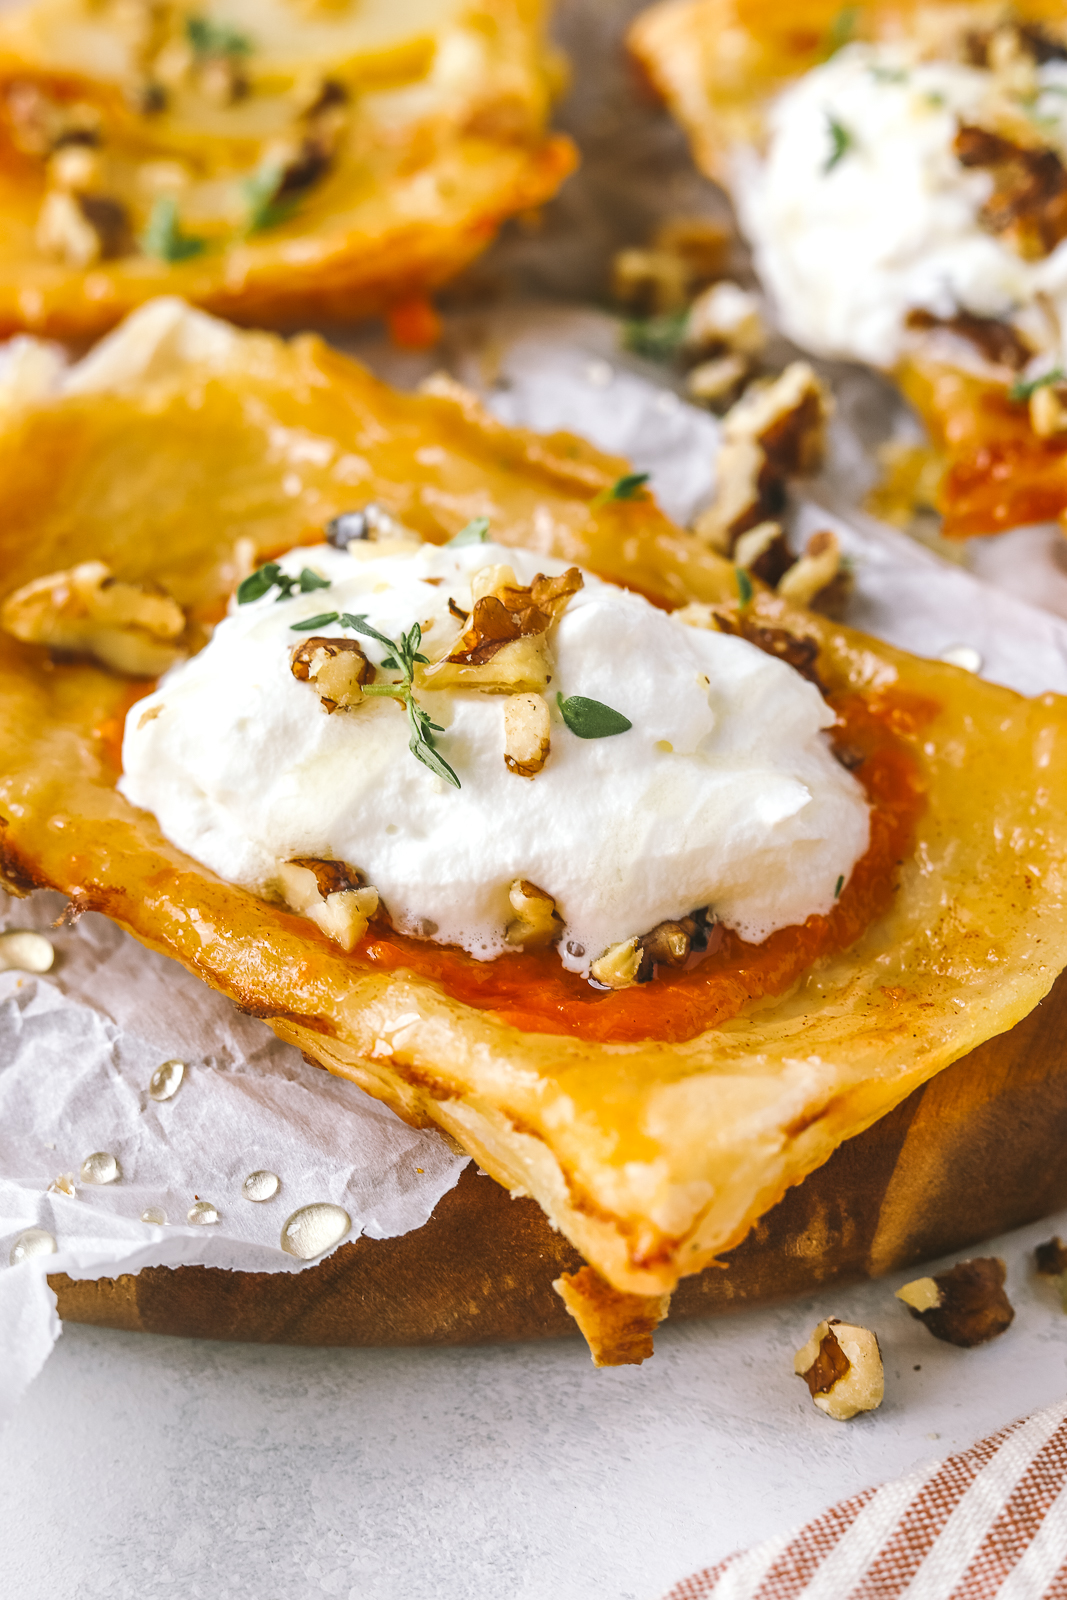 upside down apricot puff pastry tart topped with whipped cream, walnuts and thyme